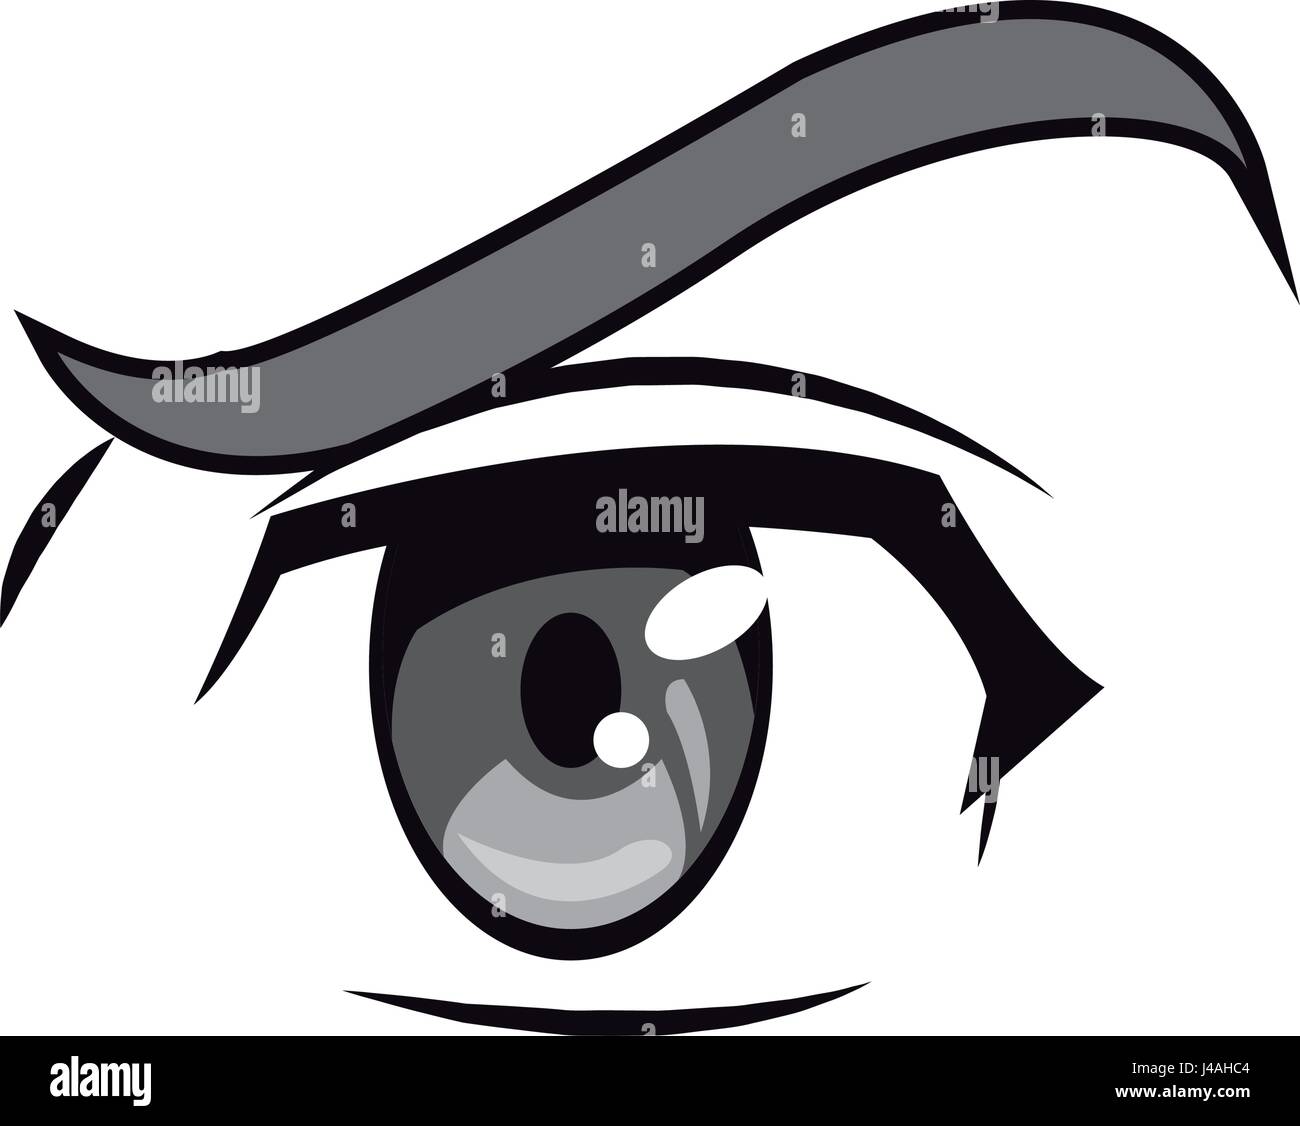 Set Eye Vector Anime Style Isolated Stock Vector Royalty Free 1670874049   Shutterstock